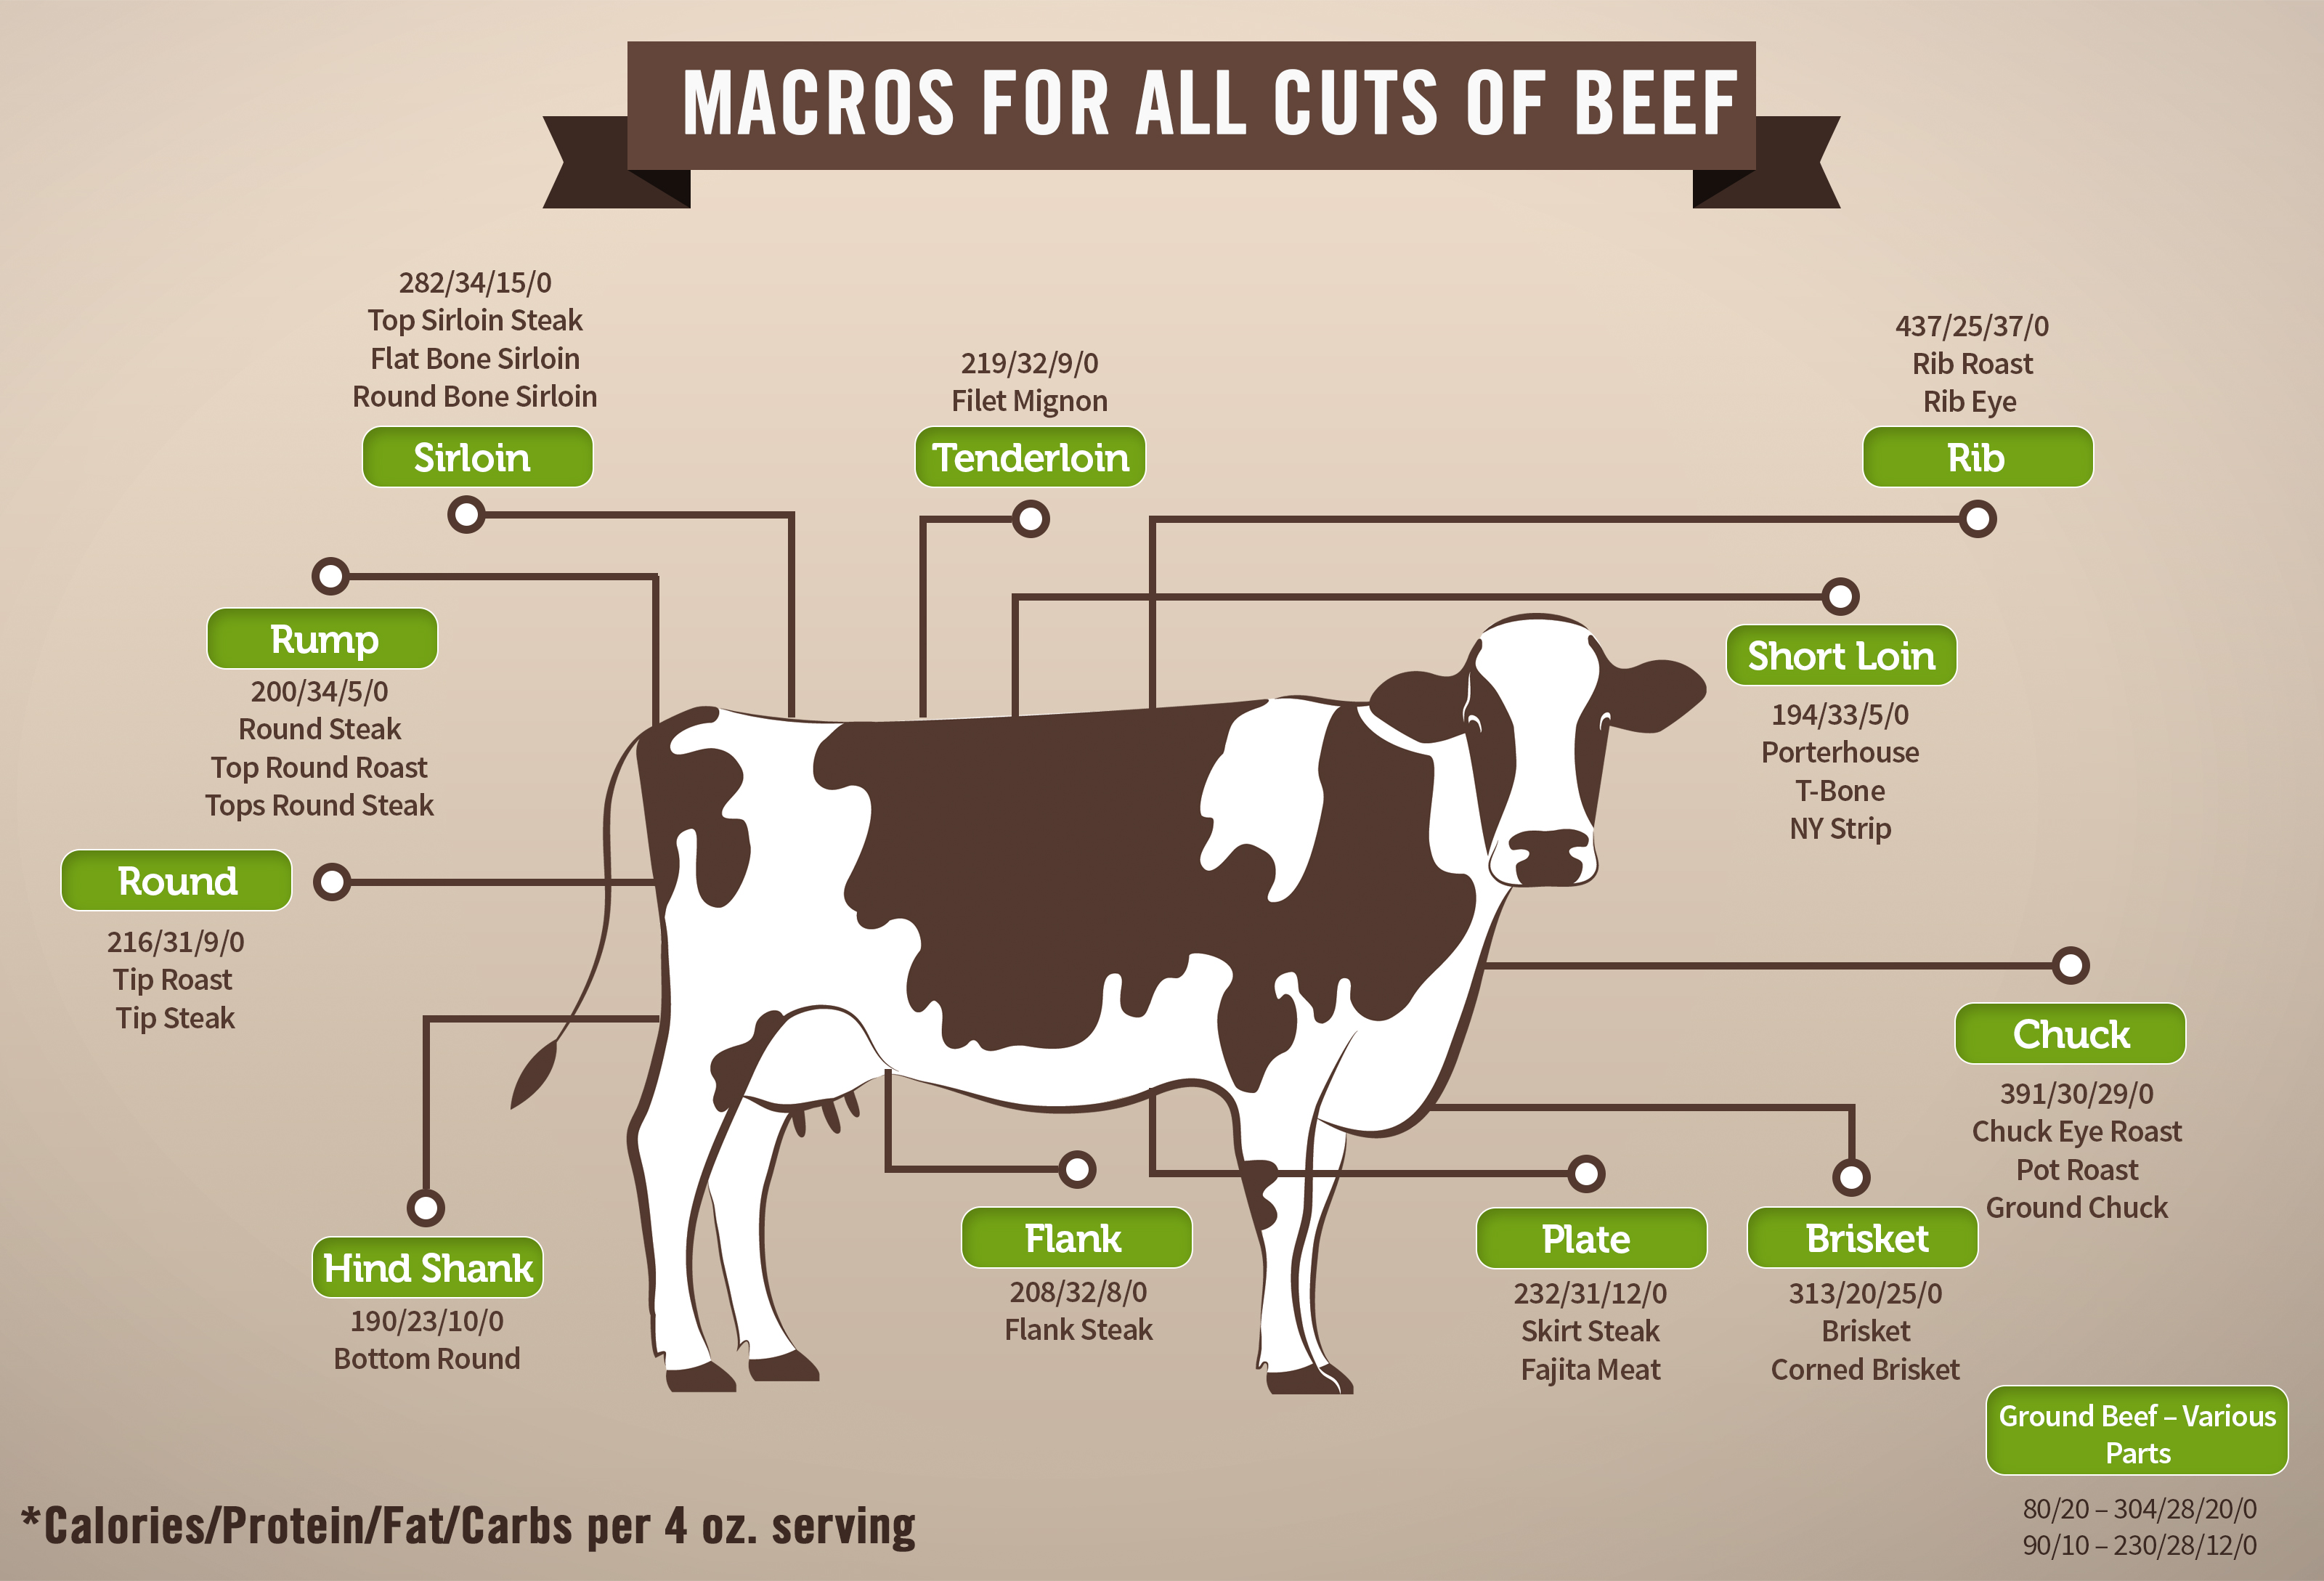 Macros for different cuts of beef